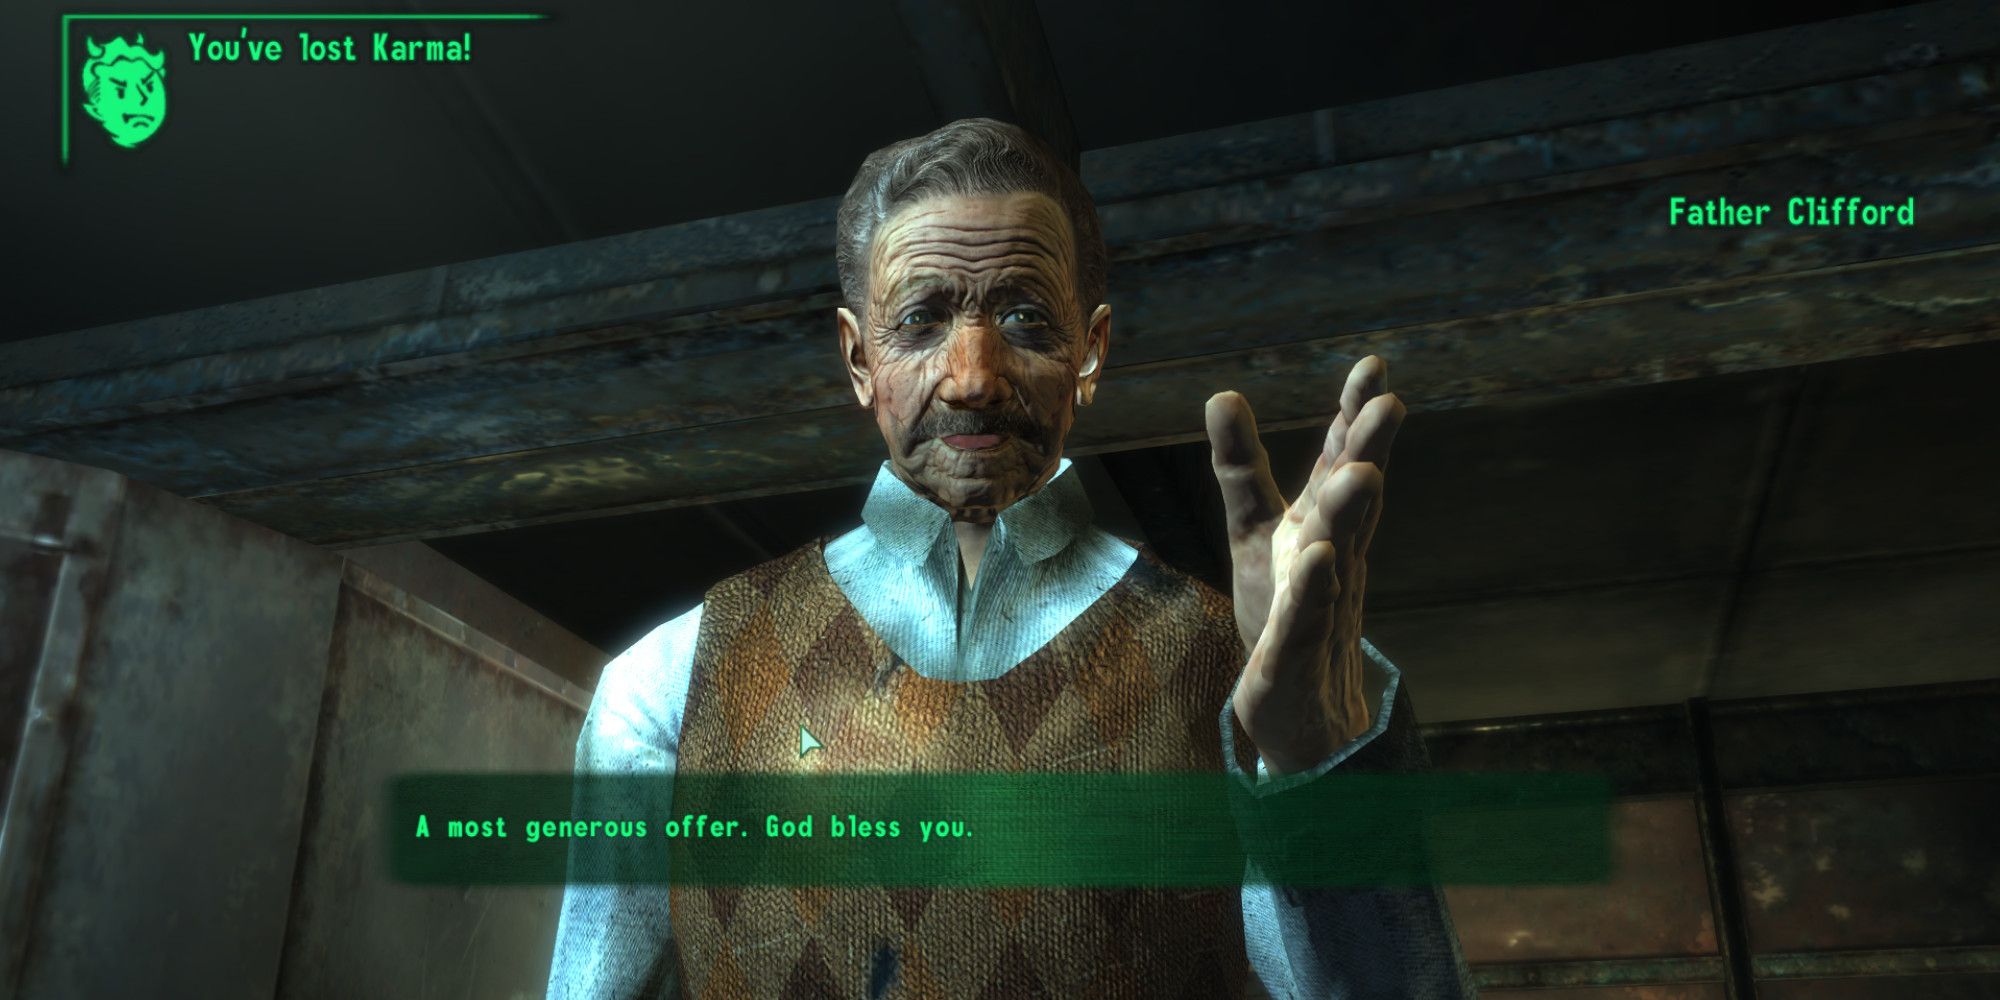 A man expresses his thanks to the player in a conversation